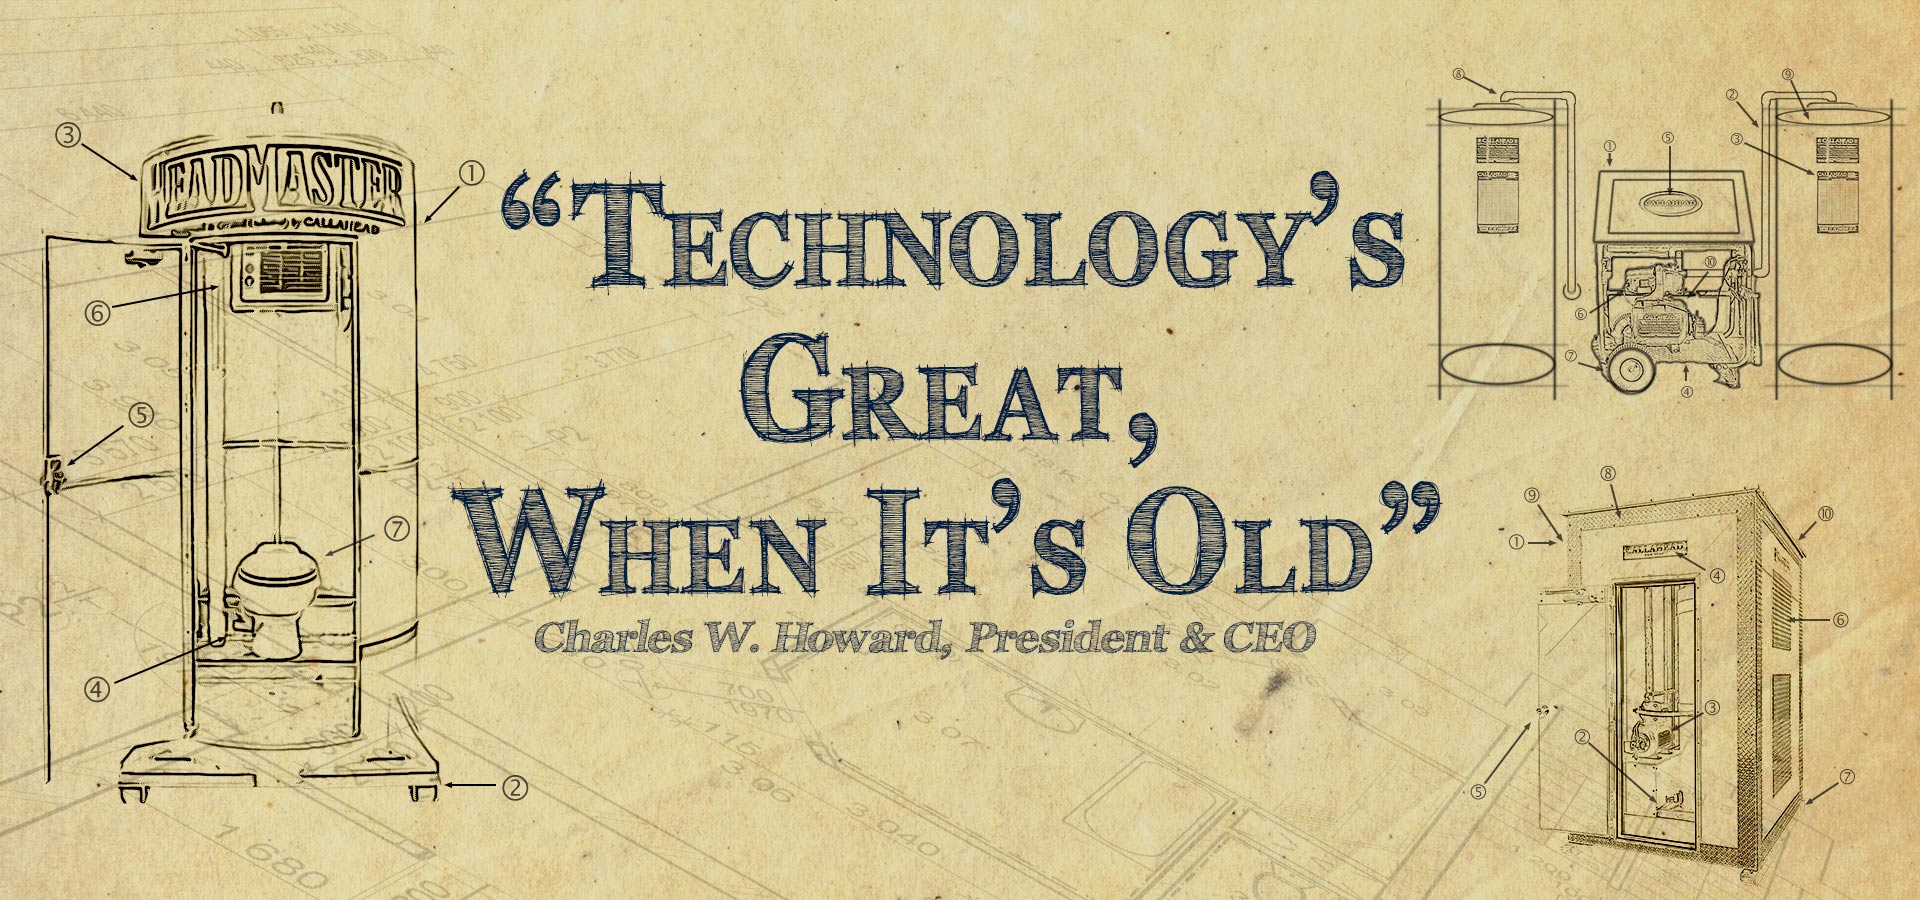 Technology's Great, When It's Old